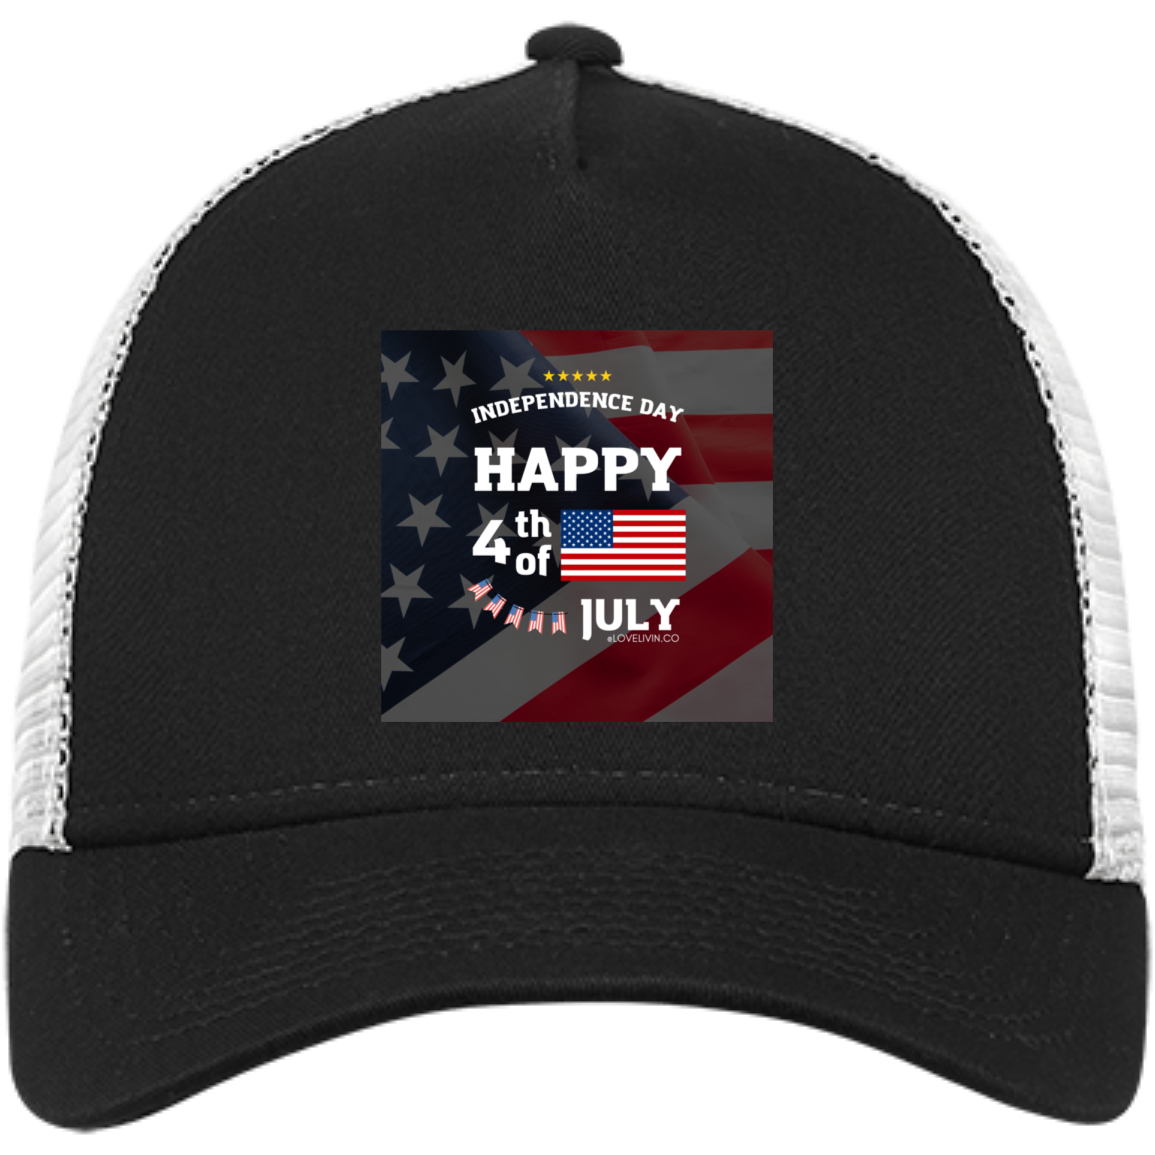 Independence day. USA- Embroidered Snapback Trucker Cap